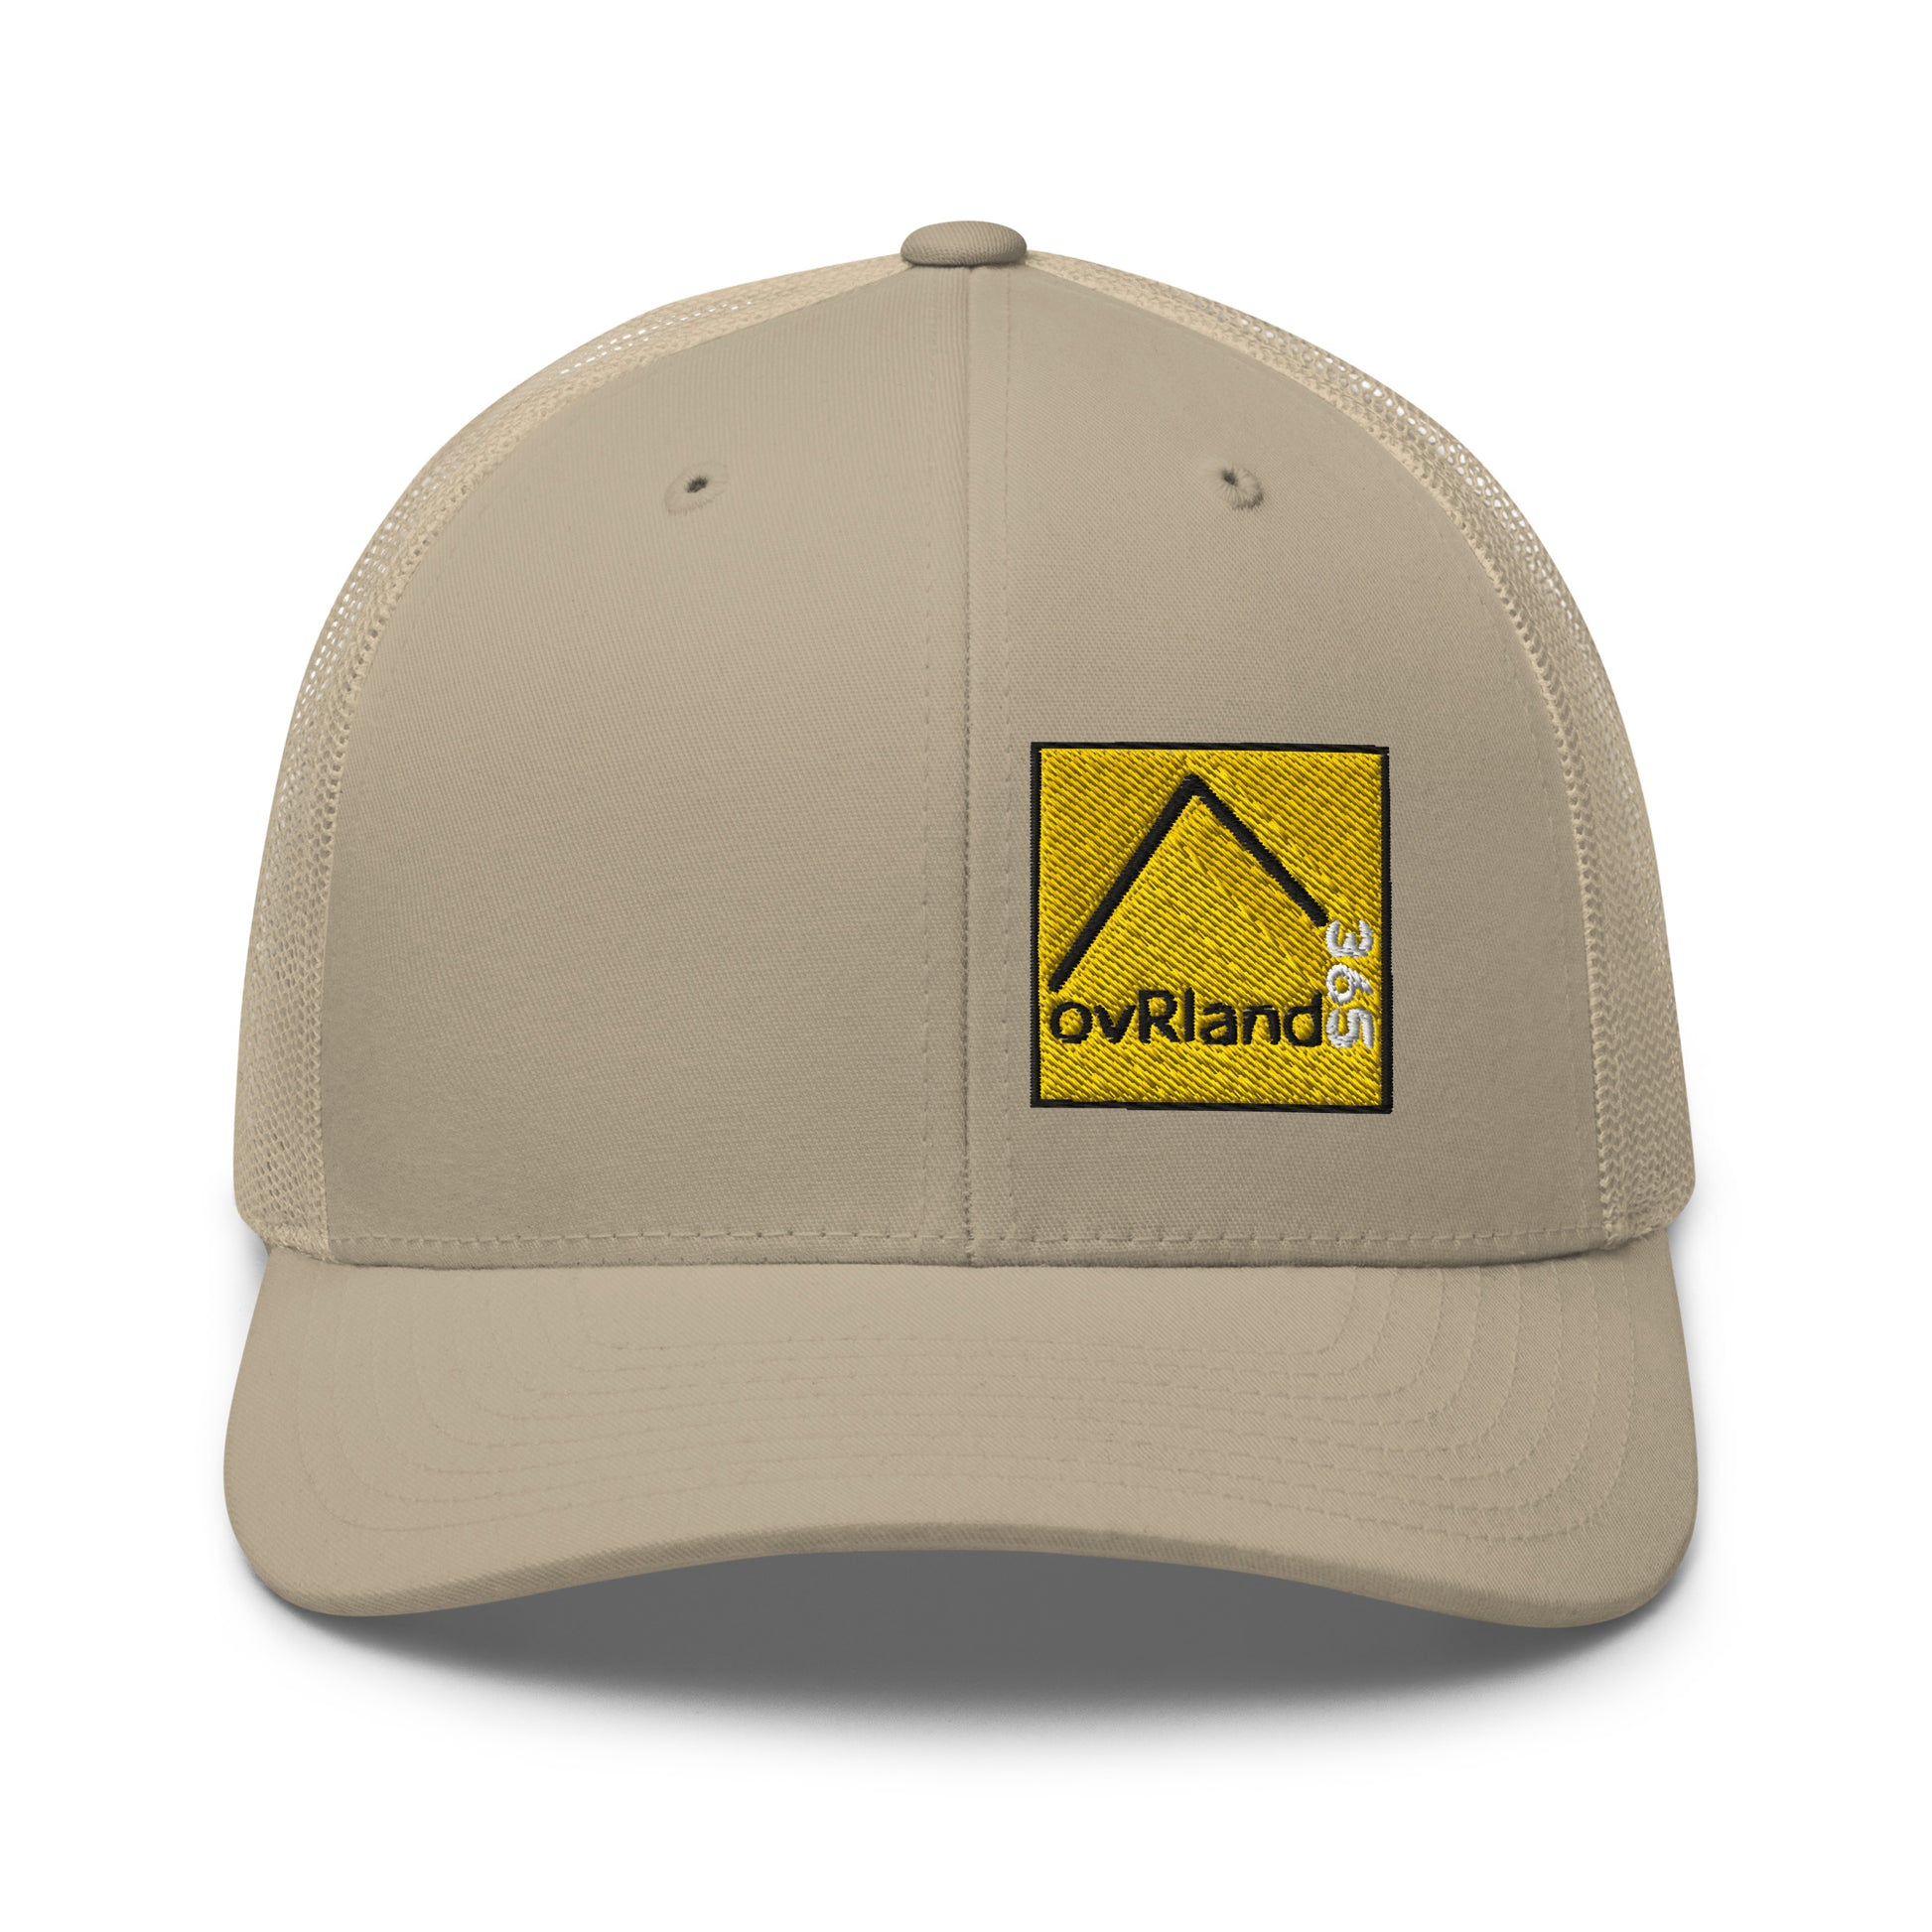 Khaki Snap Back Trucker Cap with our square 365 logo. front facing. overland365.com